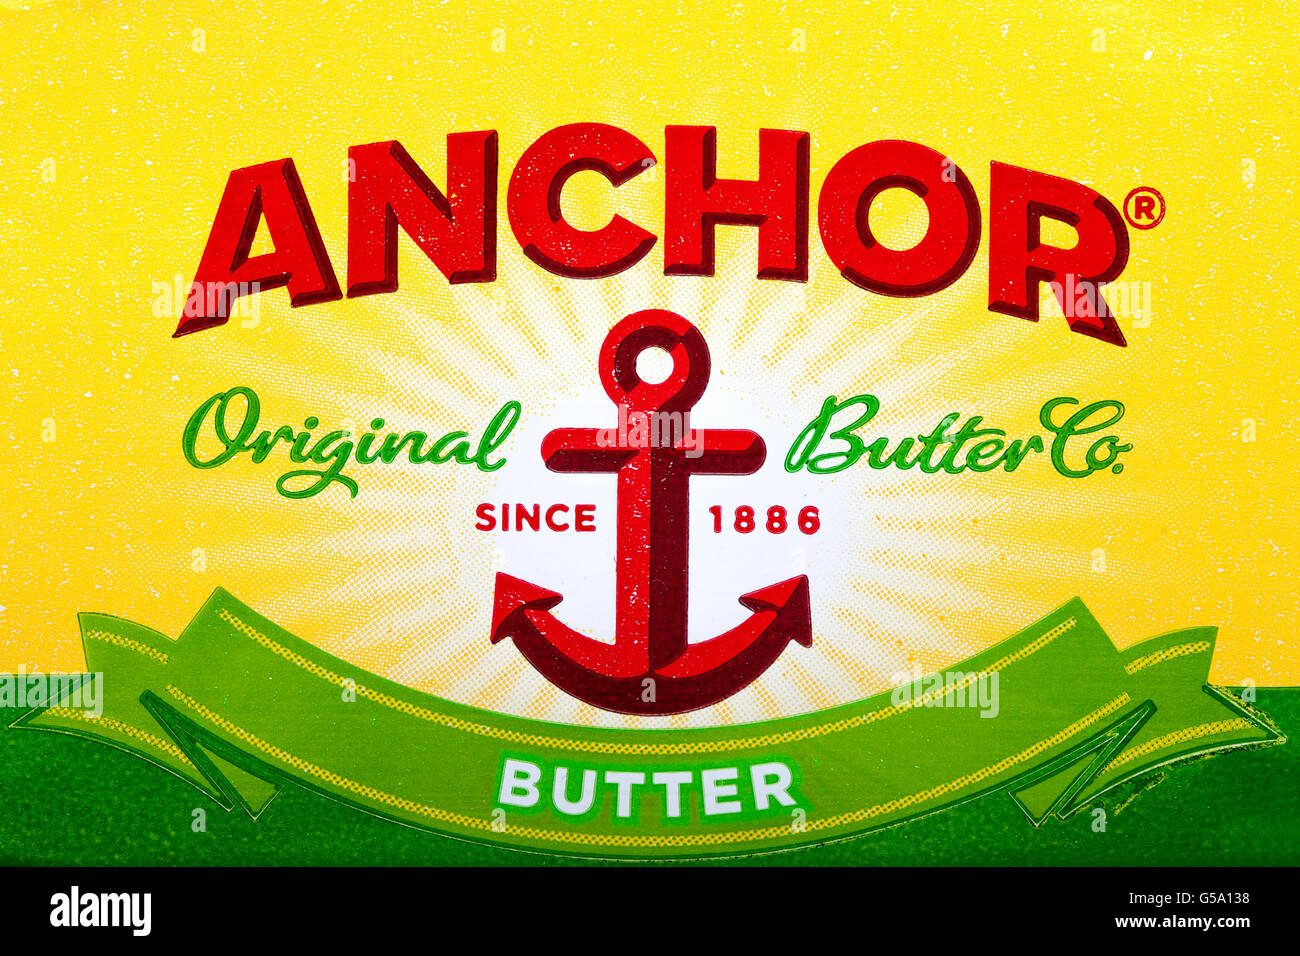 LONDON, UK - JUNE 16TH 2016: Close-up shot of the Anchor Butter logo, on 16th June 2016.  Anchor is a brand of dairy products th Stock Photo